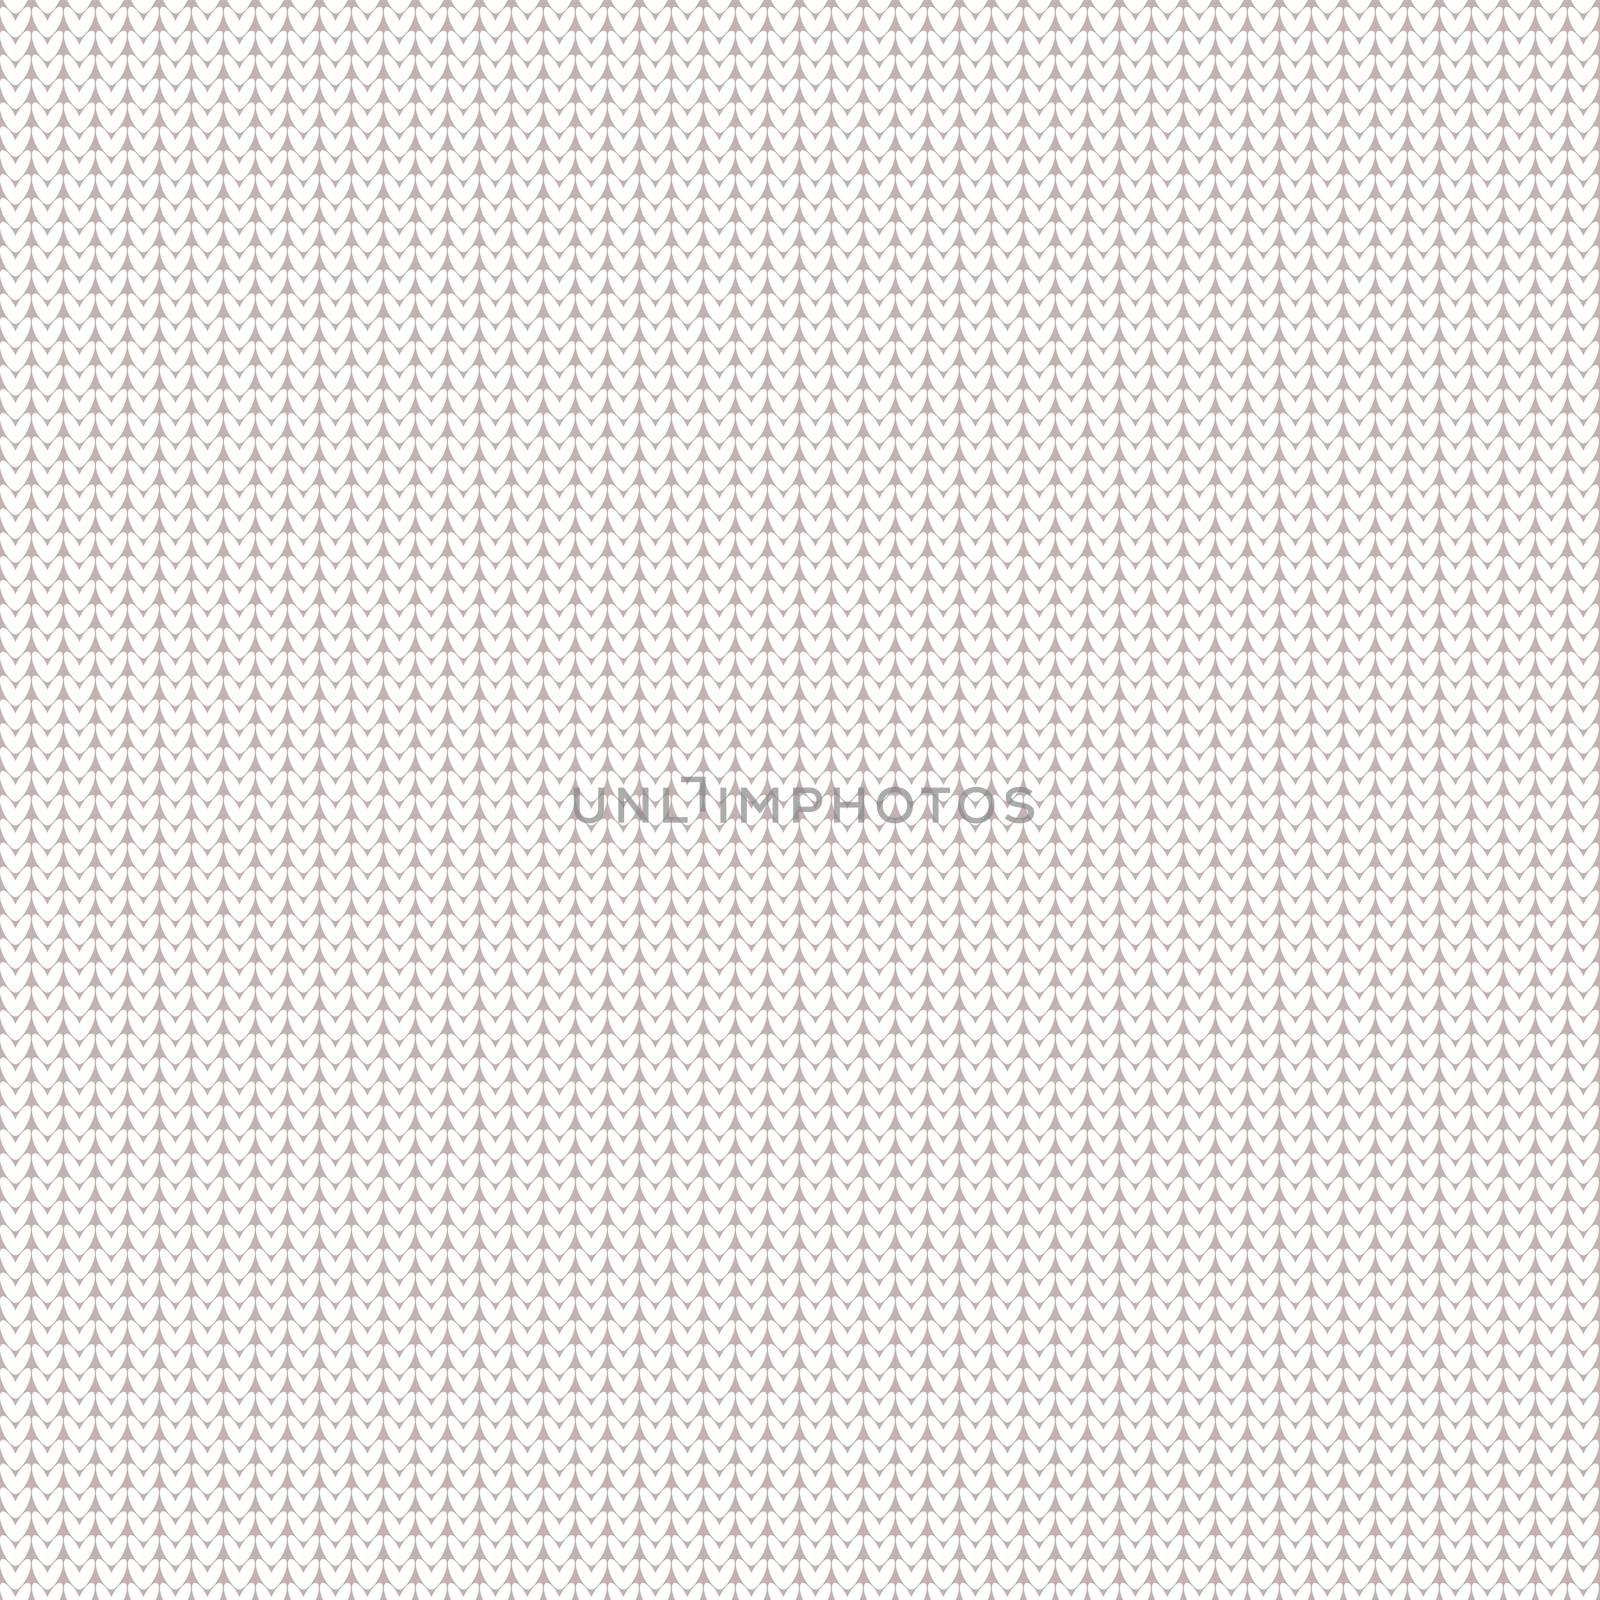 Knitted realistic seamless pattern of white color. Knit texture.